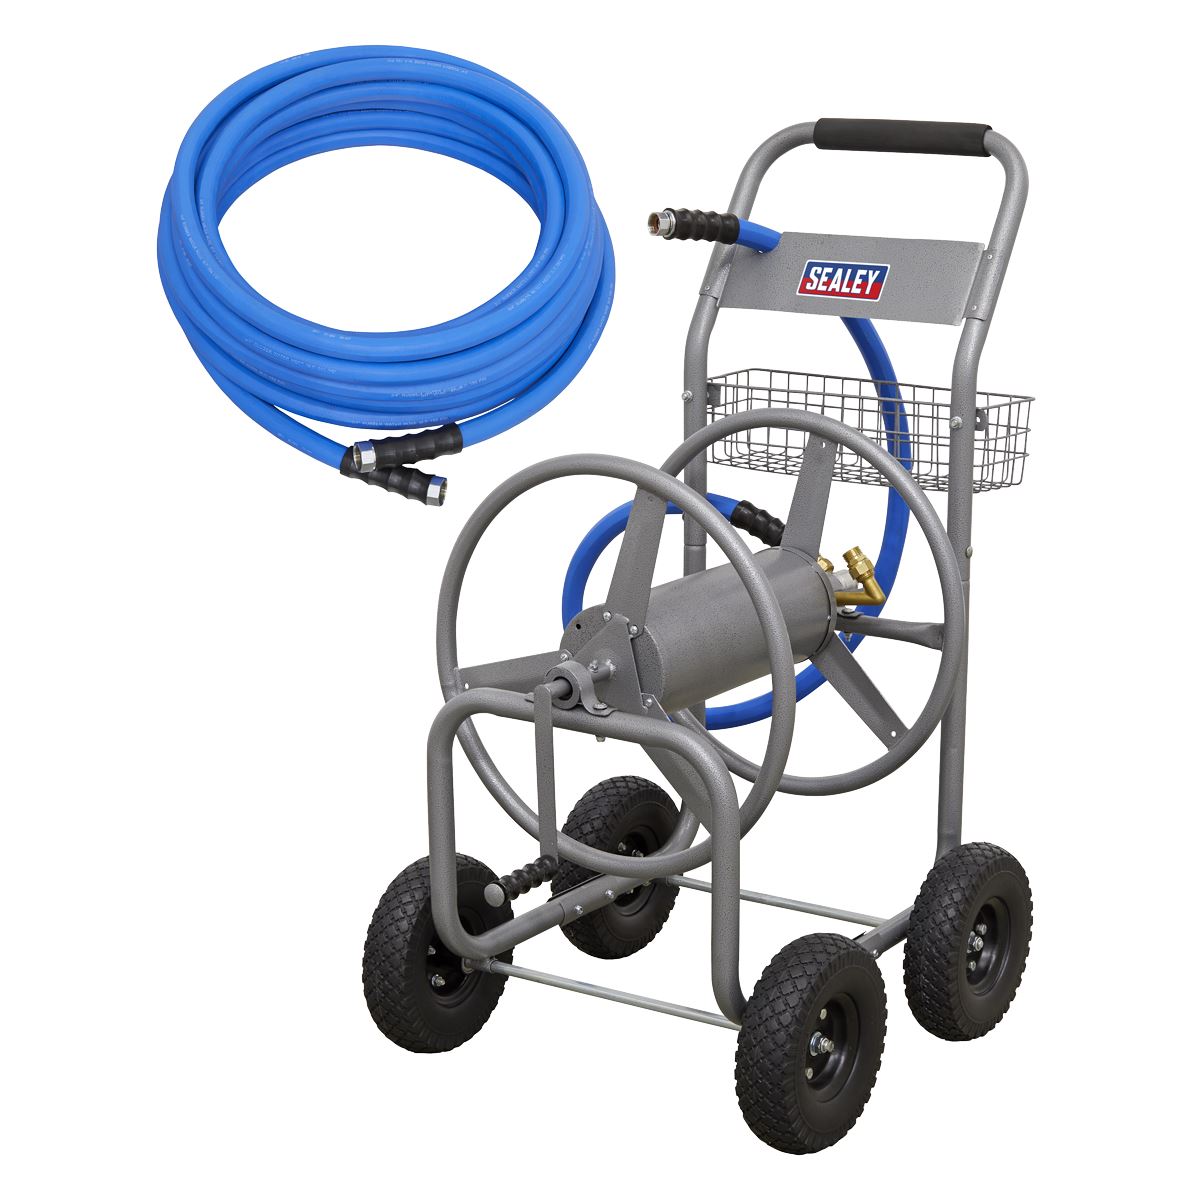 Sealey Heavy-Duty Hose Reel Cart with 50m Heavy-Duty Ø19mm Hot & Cold Rubber Water Hose